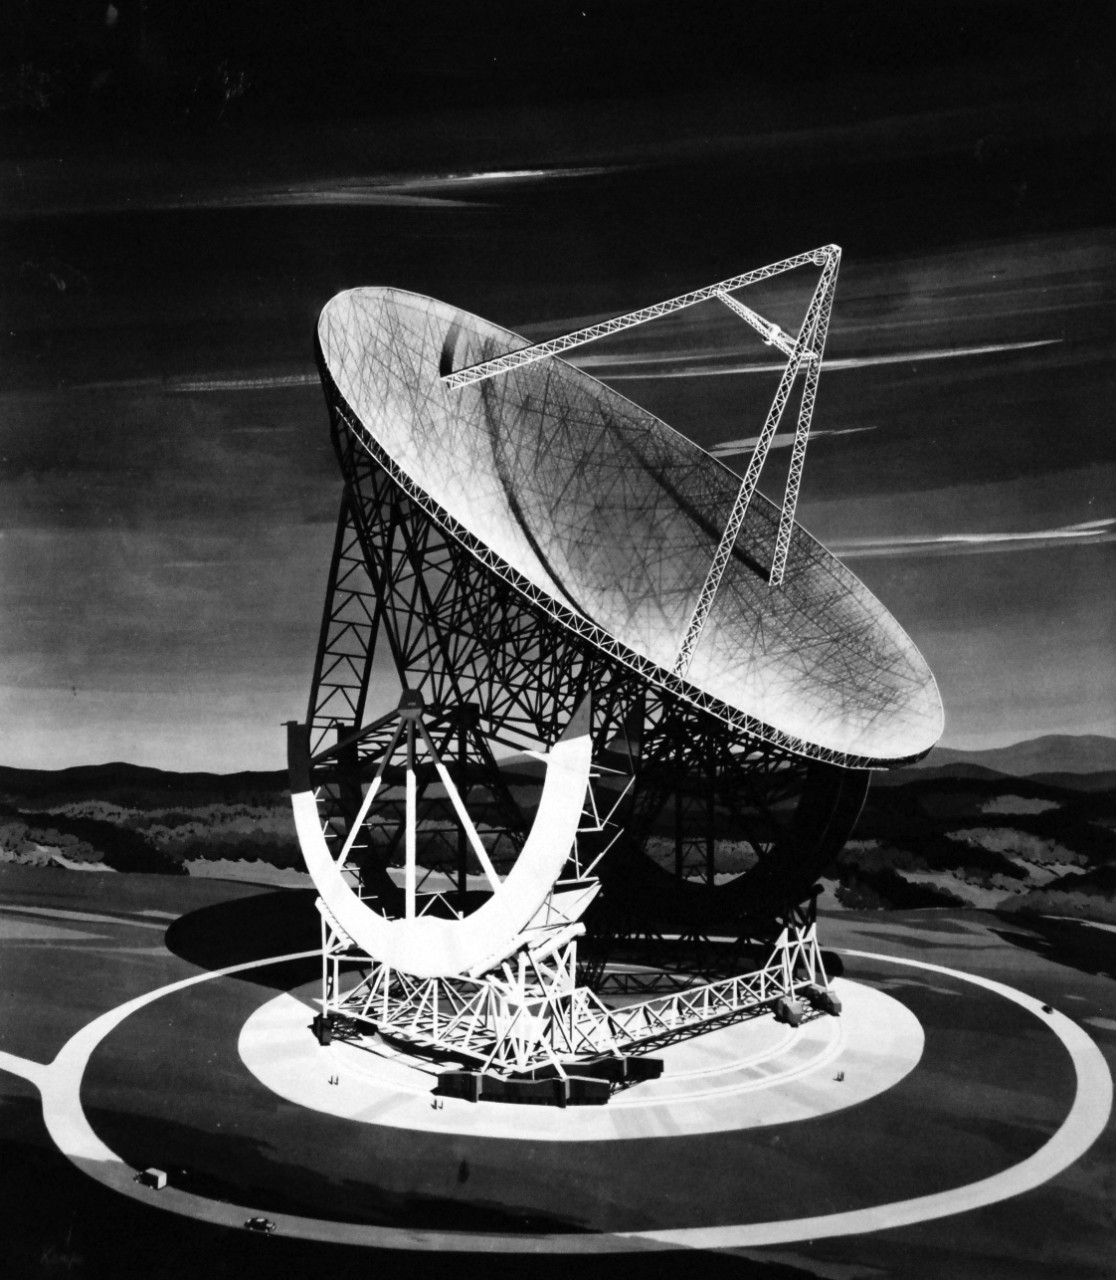 USN 710538:   Gigantic Radio Telescope Being Constructed for the U.S. Navy, 22 September 1959.   The world’s largest radio telescope being constructed for U.S. Navy, near Sugar Grove, West Virginia, after scheduled completion in 1962.  The 20,000 ton facility, to be known official as Naval Radio Research Station, will give the U.S., the world’s most powerful “ear on the universe.”  It will enable Navy scientists to tune in on the radio signals emitted by astral bodies in 19 times the distance probed by the 200-inch optical telescope at Mount Palomar, California, the instruments aluminum mesh reflector dish will have a 600-foot diameter, twice the length of a football field, and an area exceeding seven acres, rotation of the huge arcs supporting the dish complex will elevate the reflector at any angle above the horizon the entire structure will rotate on rollers riding circular tracks on the ground.   Thus, the dish can be aimed at any point in the sky above the horizon.  The telescope will be electronically controlled from a nearby laboratory operations building.  Contracting agency is Bureau of Yards and Docks acting for Naval Research Laboratory whose scientists formulate basic specifications and other criteria after years of intensive research.  This artist’s conception shows the world’s largest radio telescope now being erected by the U.S. Navy on a 1,500 acre size near Sugar Grove, West Virginia.  The $79,000,000 facility is being designed by Grad, Urbahn, and Shelye, New York Architects Engineers.  The telescopes immensity may be gauged by comparison with drawn to scale to people and vehicle in the photograph.  Note, building was halted in 1962 and was never completed.   Official U.S. Navy Photograph, now in the collections of the National Archives.  